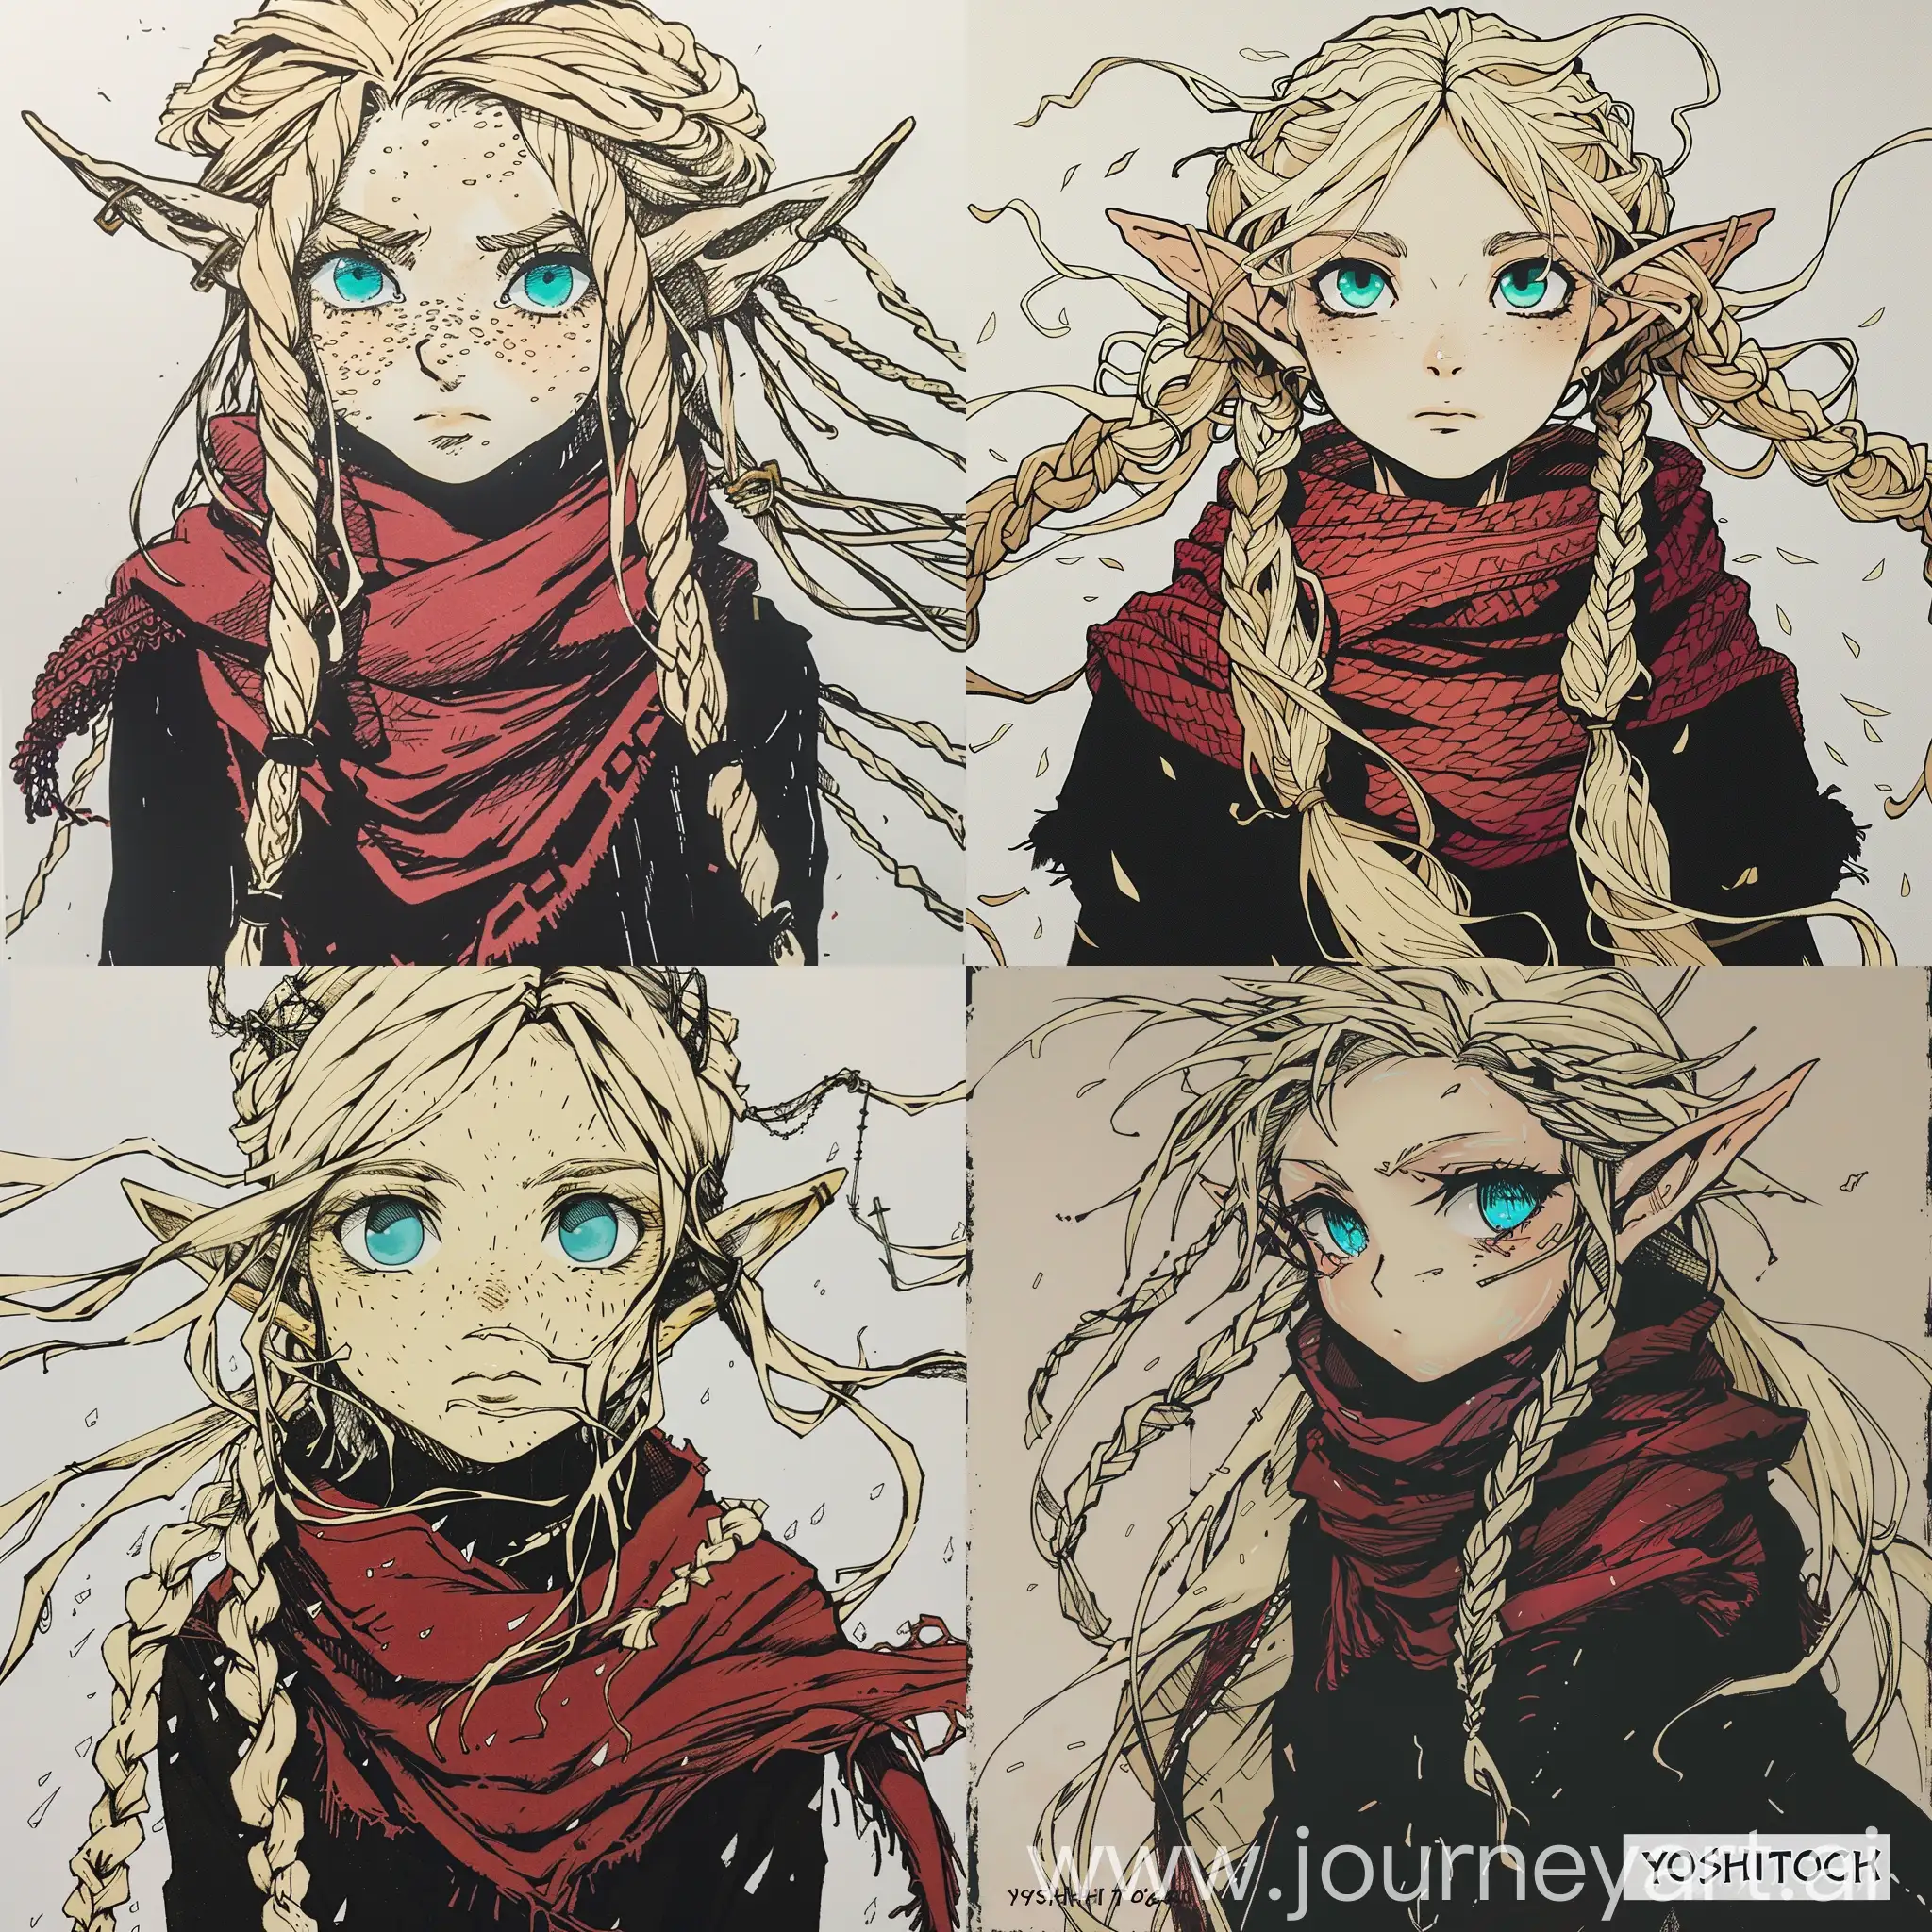 A edgy animation scratchy style manga style, hand drawing by Yoshihiro Togashi of a young teenage female high elf with long cream coloured scattered hair with braids and turquoise eyes wearing a crimson scarf and black clothes